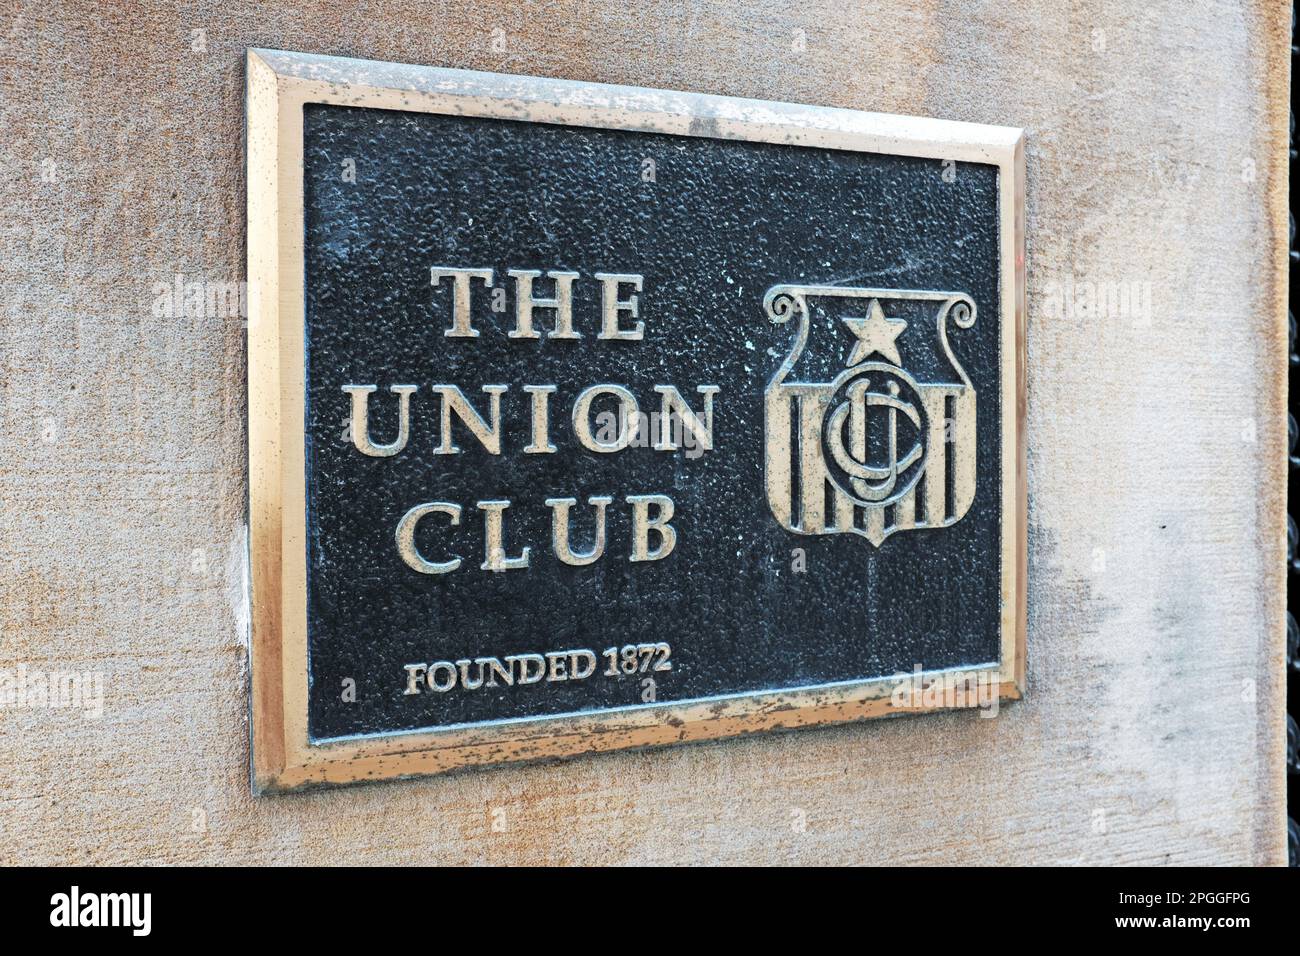 The Cleveland Union Club, a private social club incorporated in 1872, at the corner of Euclid and East 12th in downtown Cleveland, Ohio, USA. Stock Photo